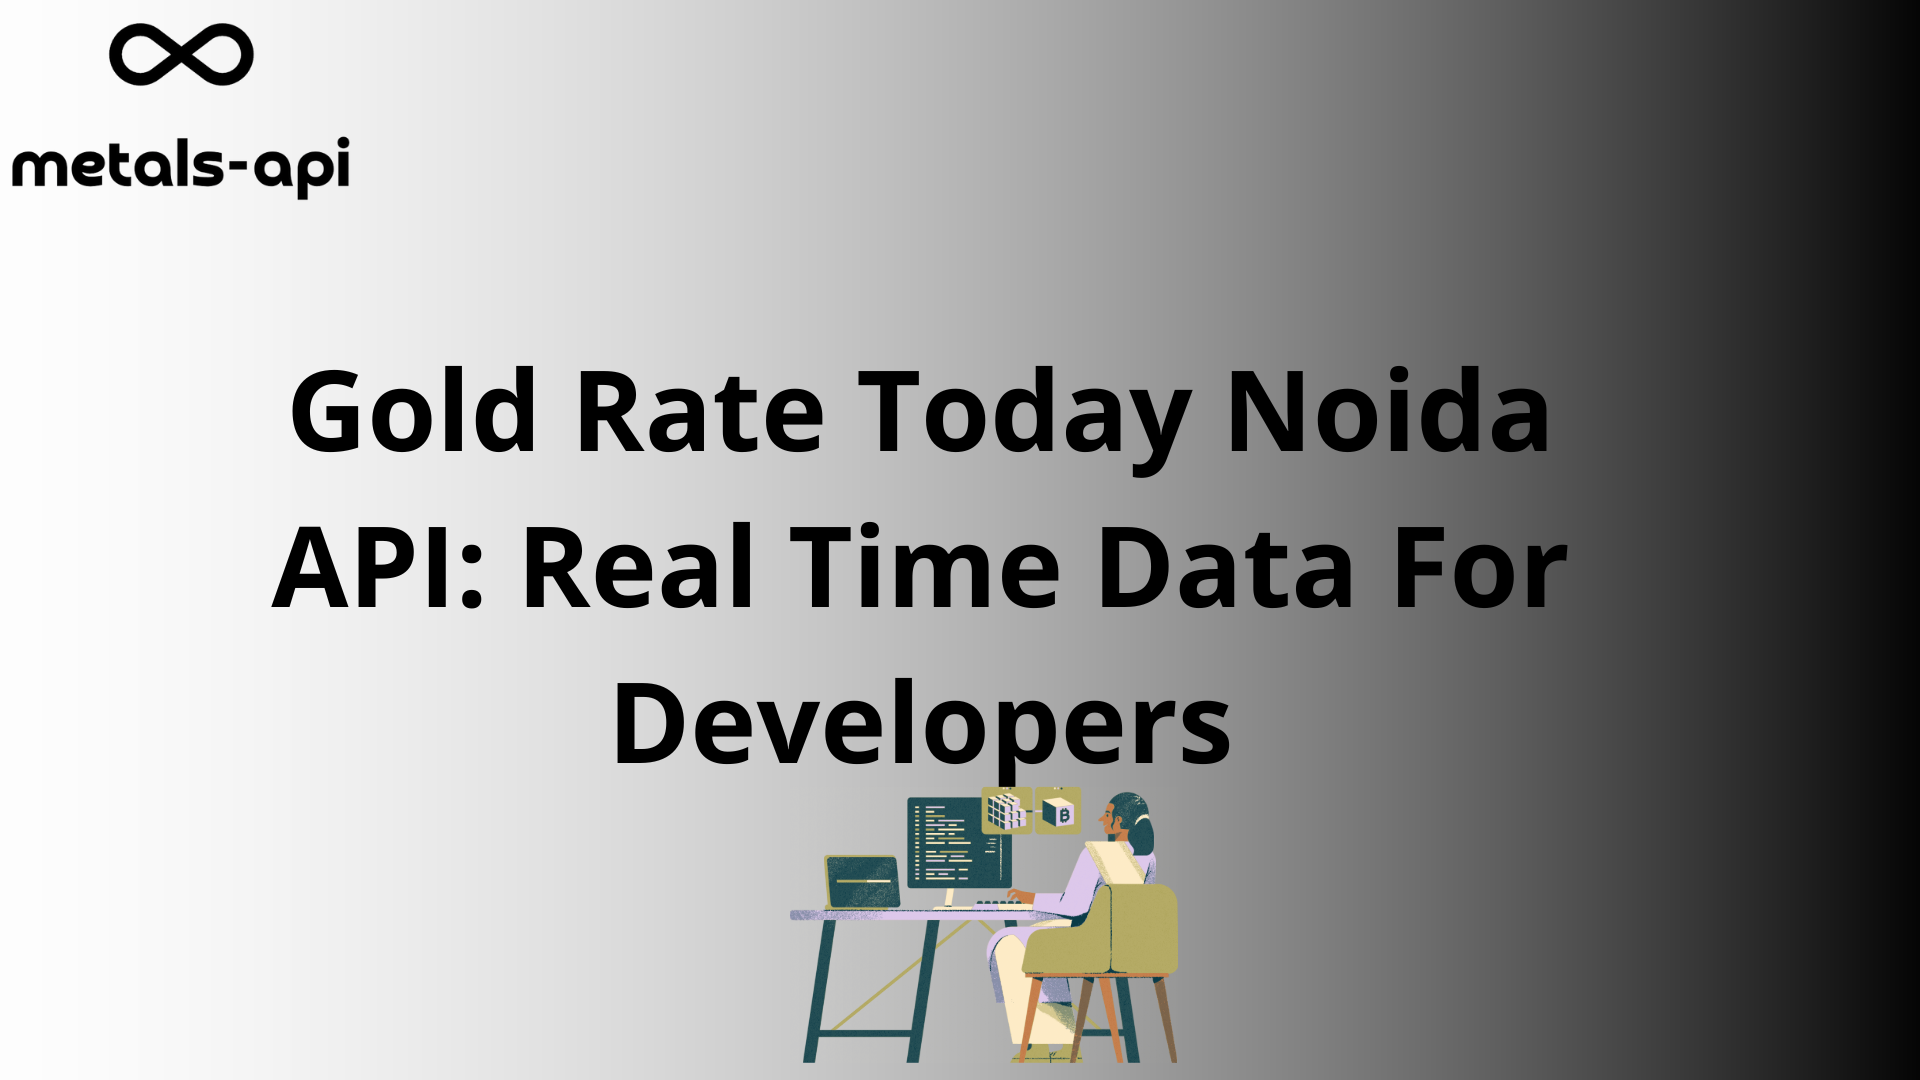 Gold Rate Today Noida API: Real Time Data For Developers